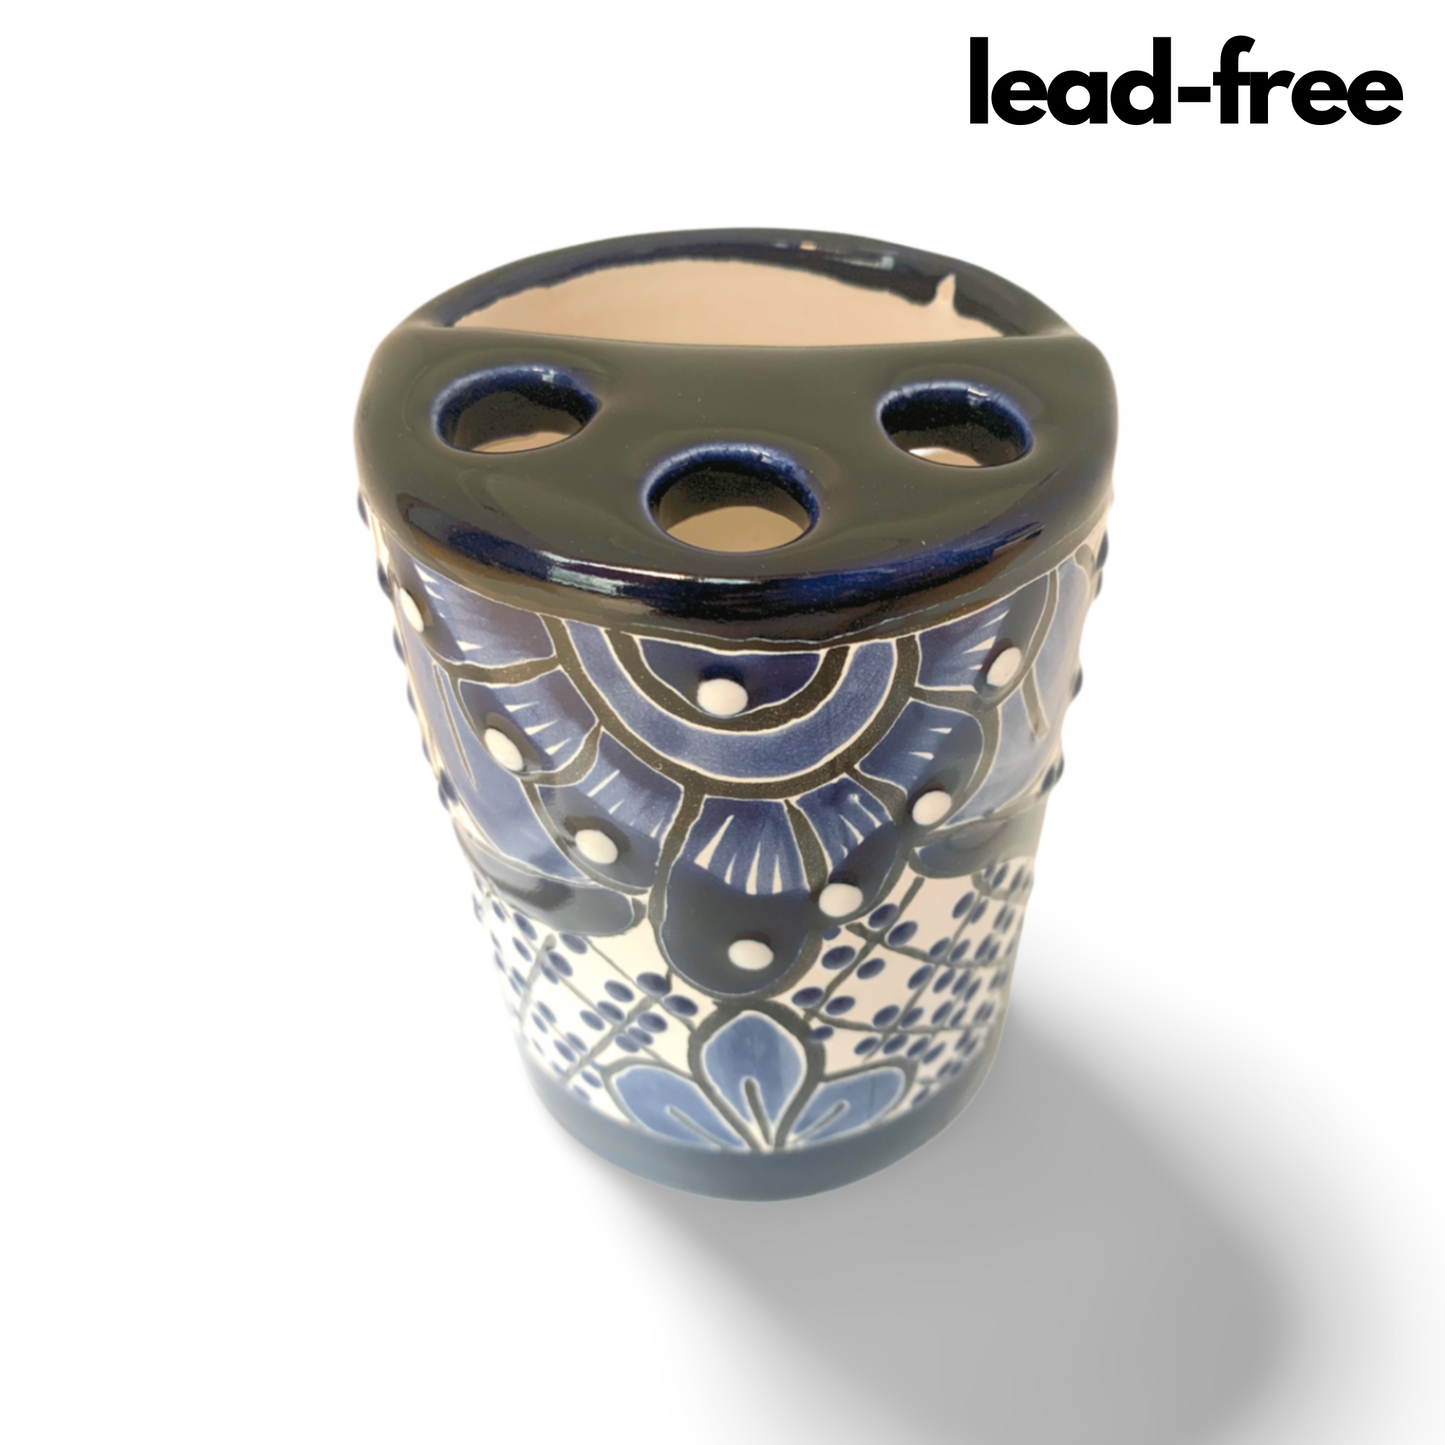 lead free Hand-painted Talavera Toothbrush Holder by Casa Fiesta Designs, offers compact storage and adds charm to your bathroom.